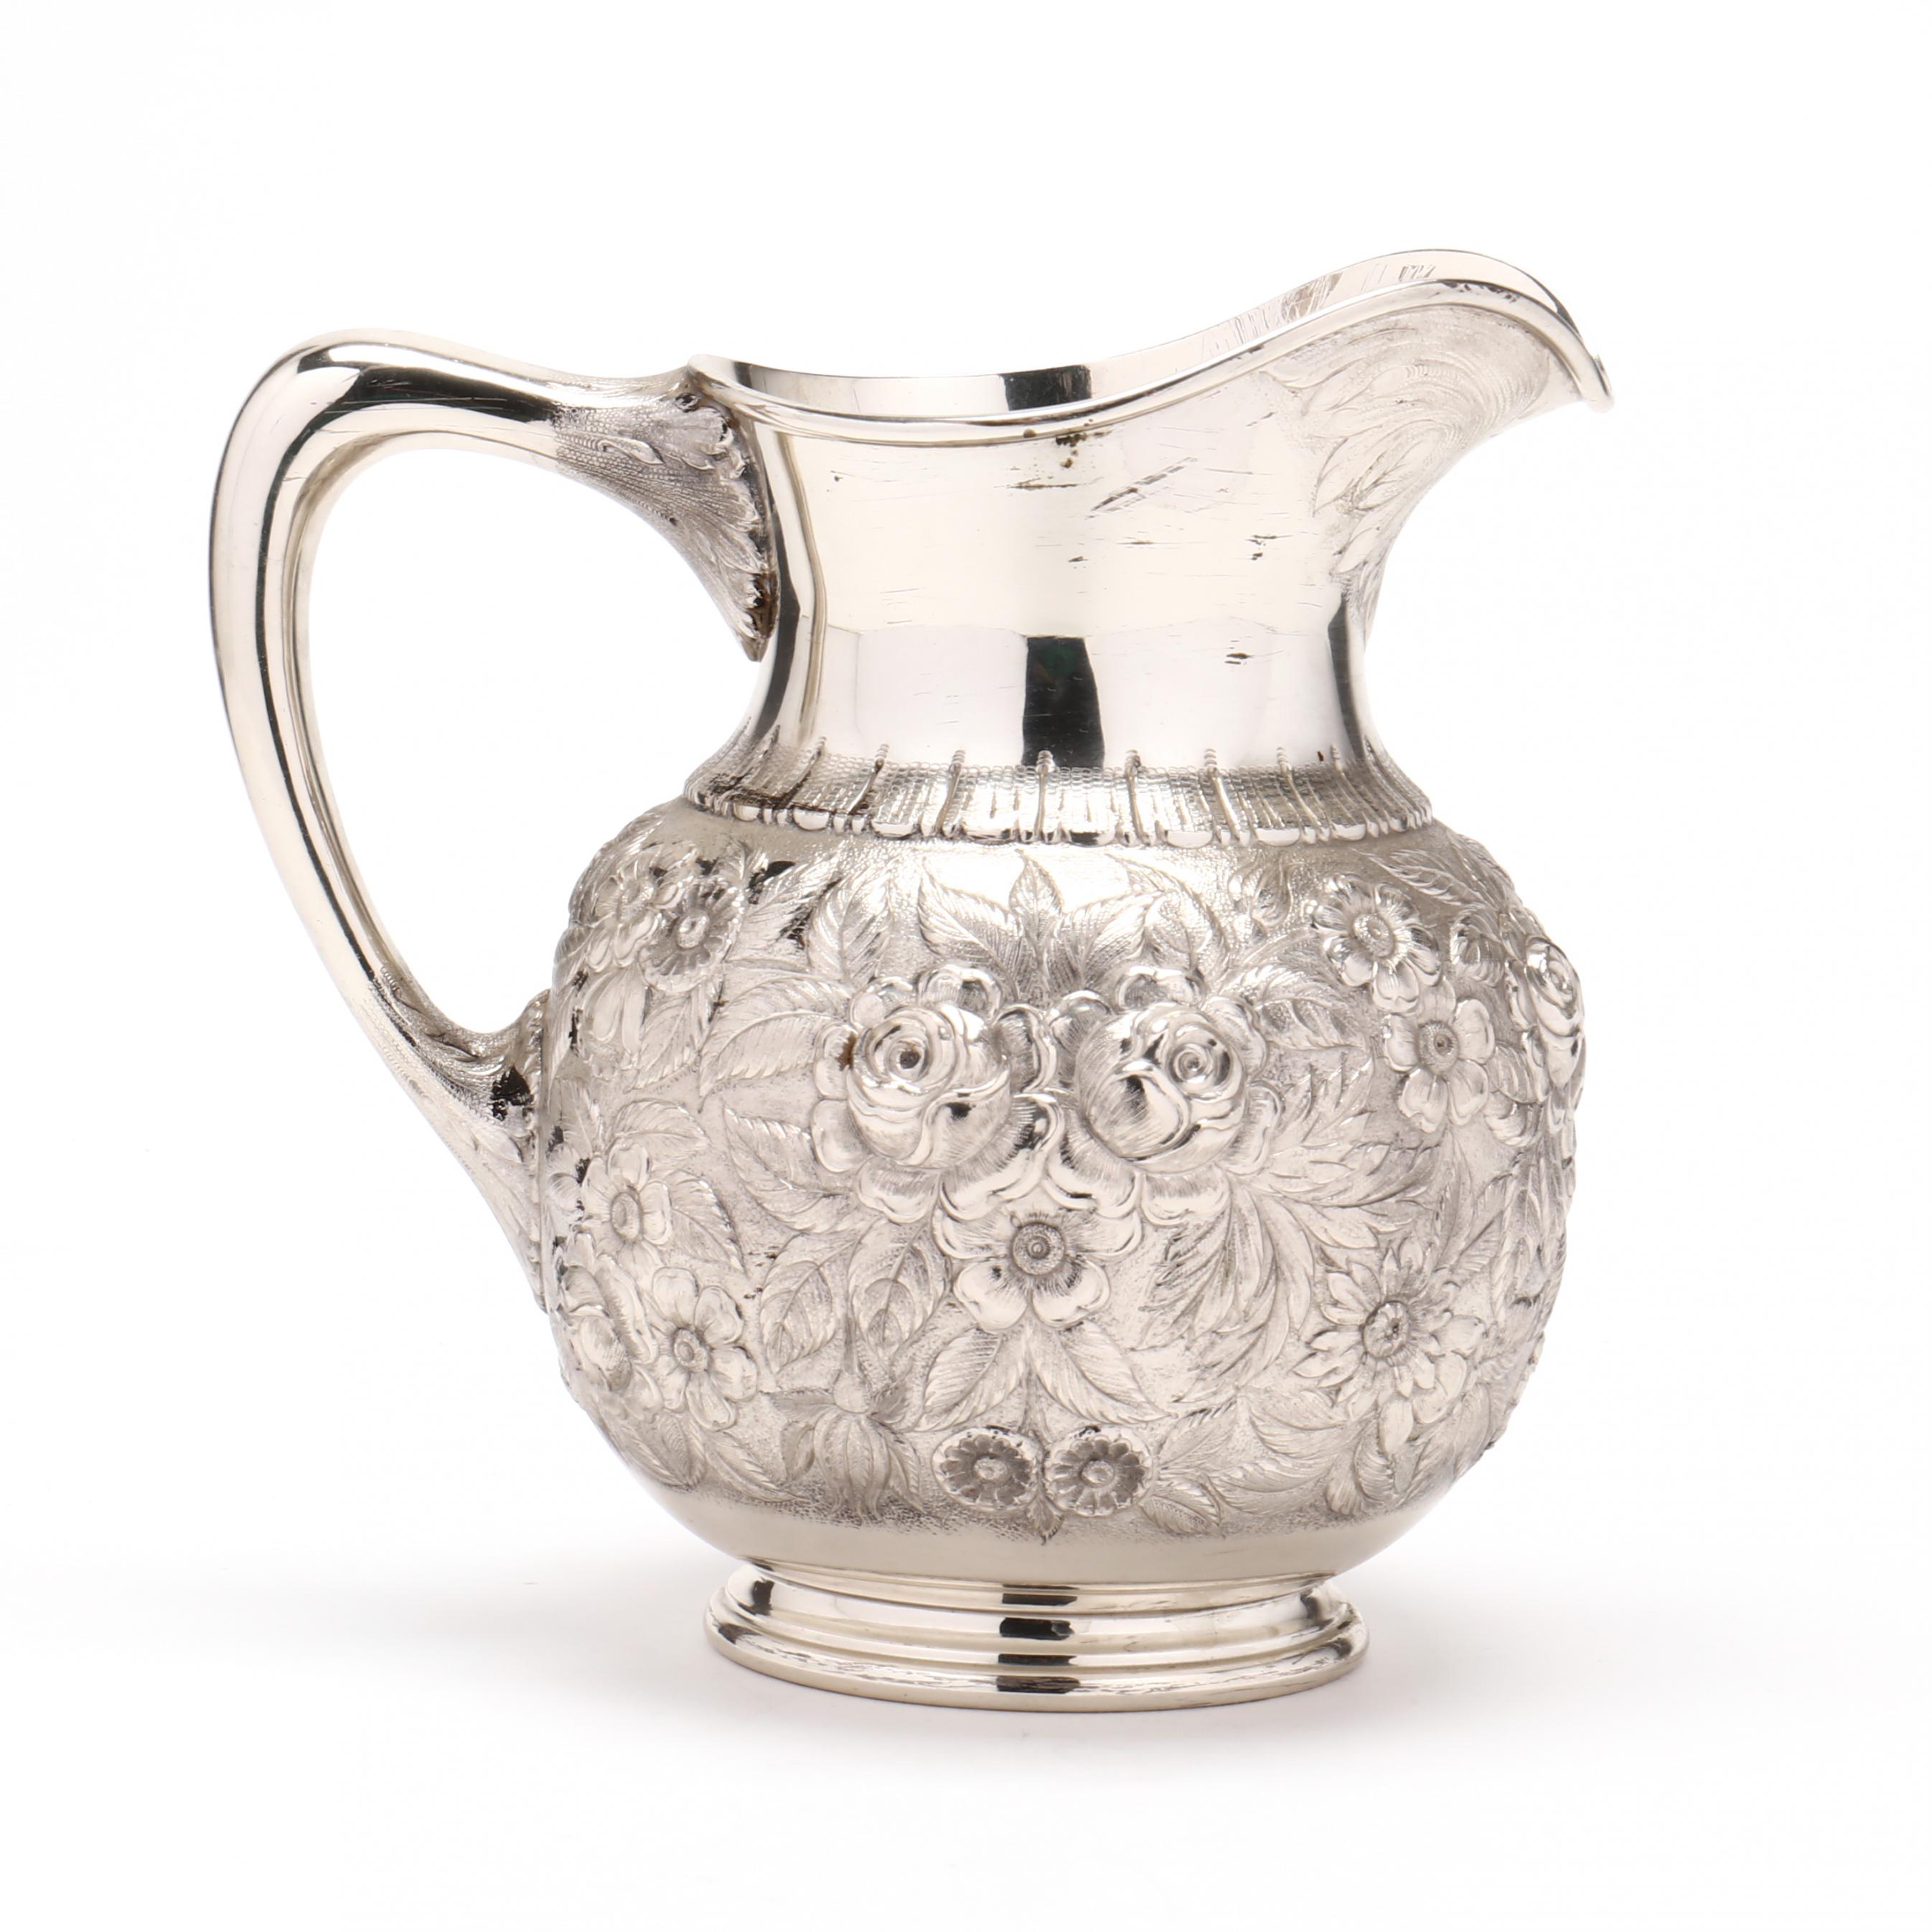 Sold at Auction: S Kirk & Son Sterling Repousse Hot Water Pitcher